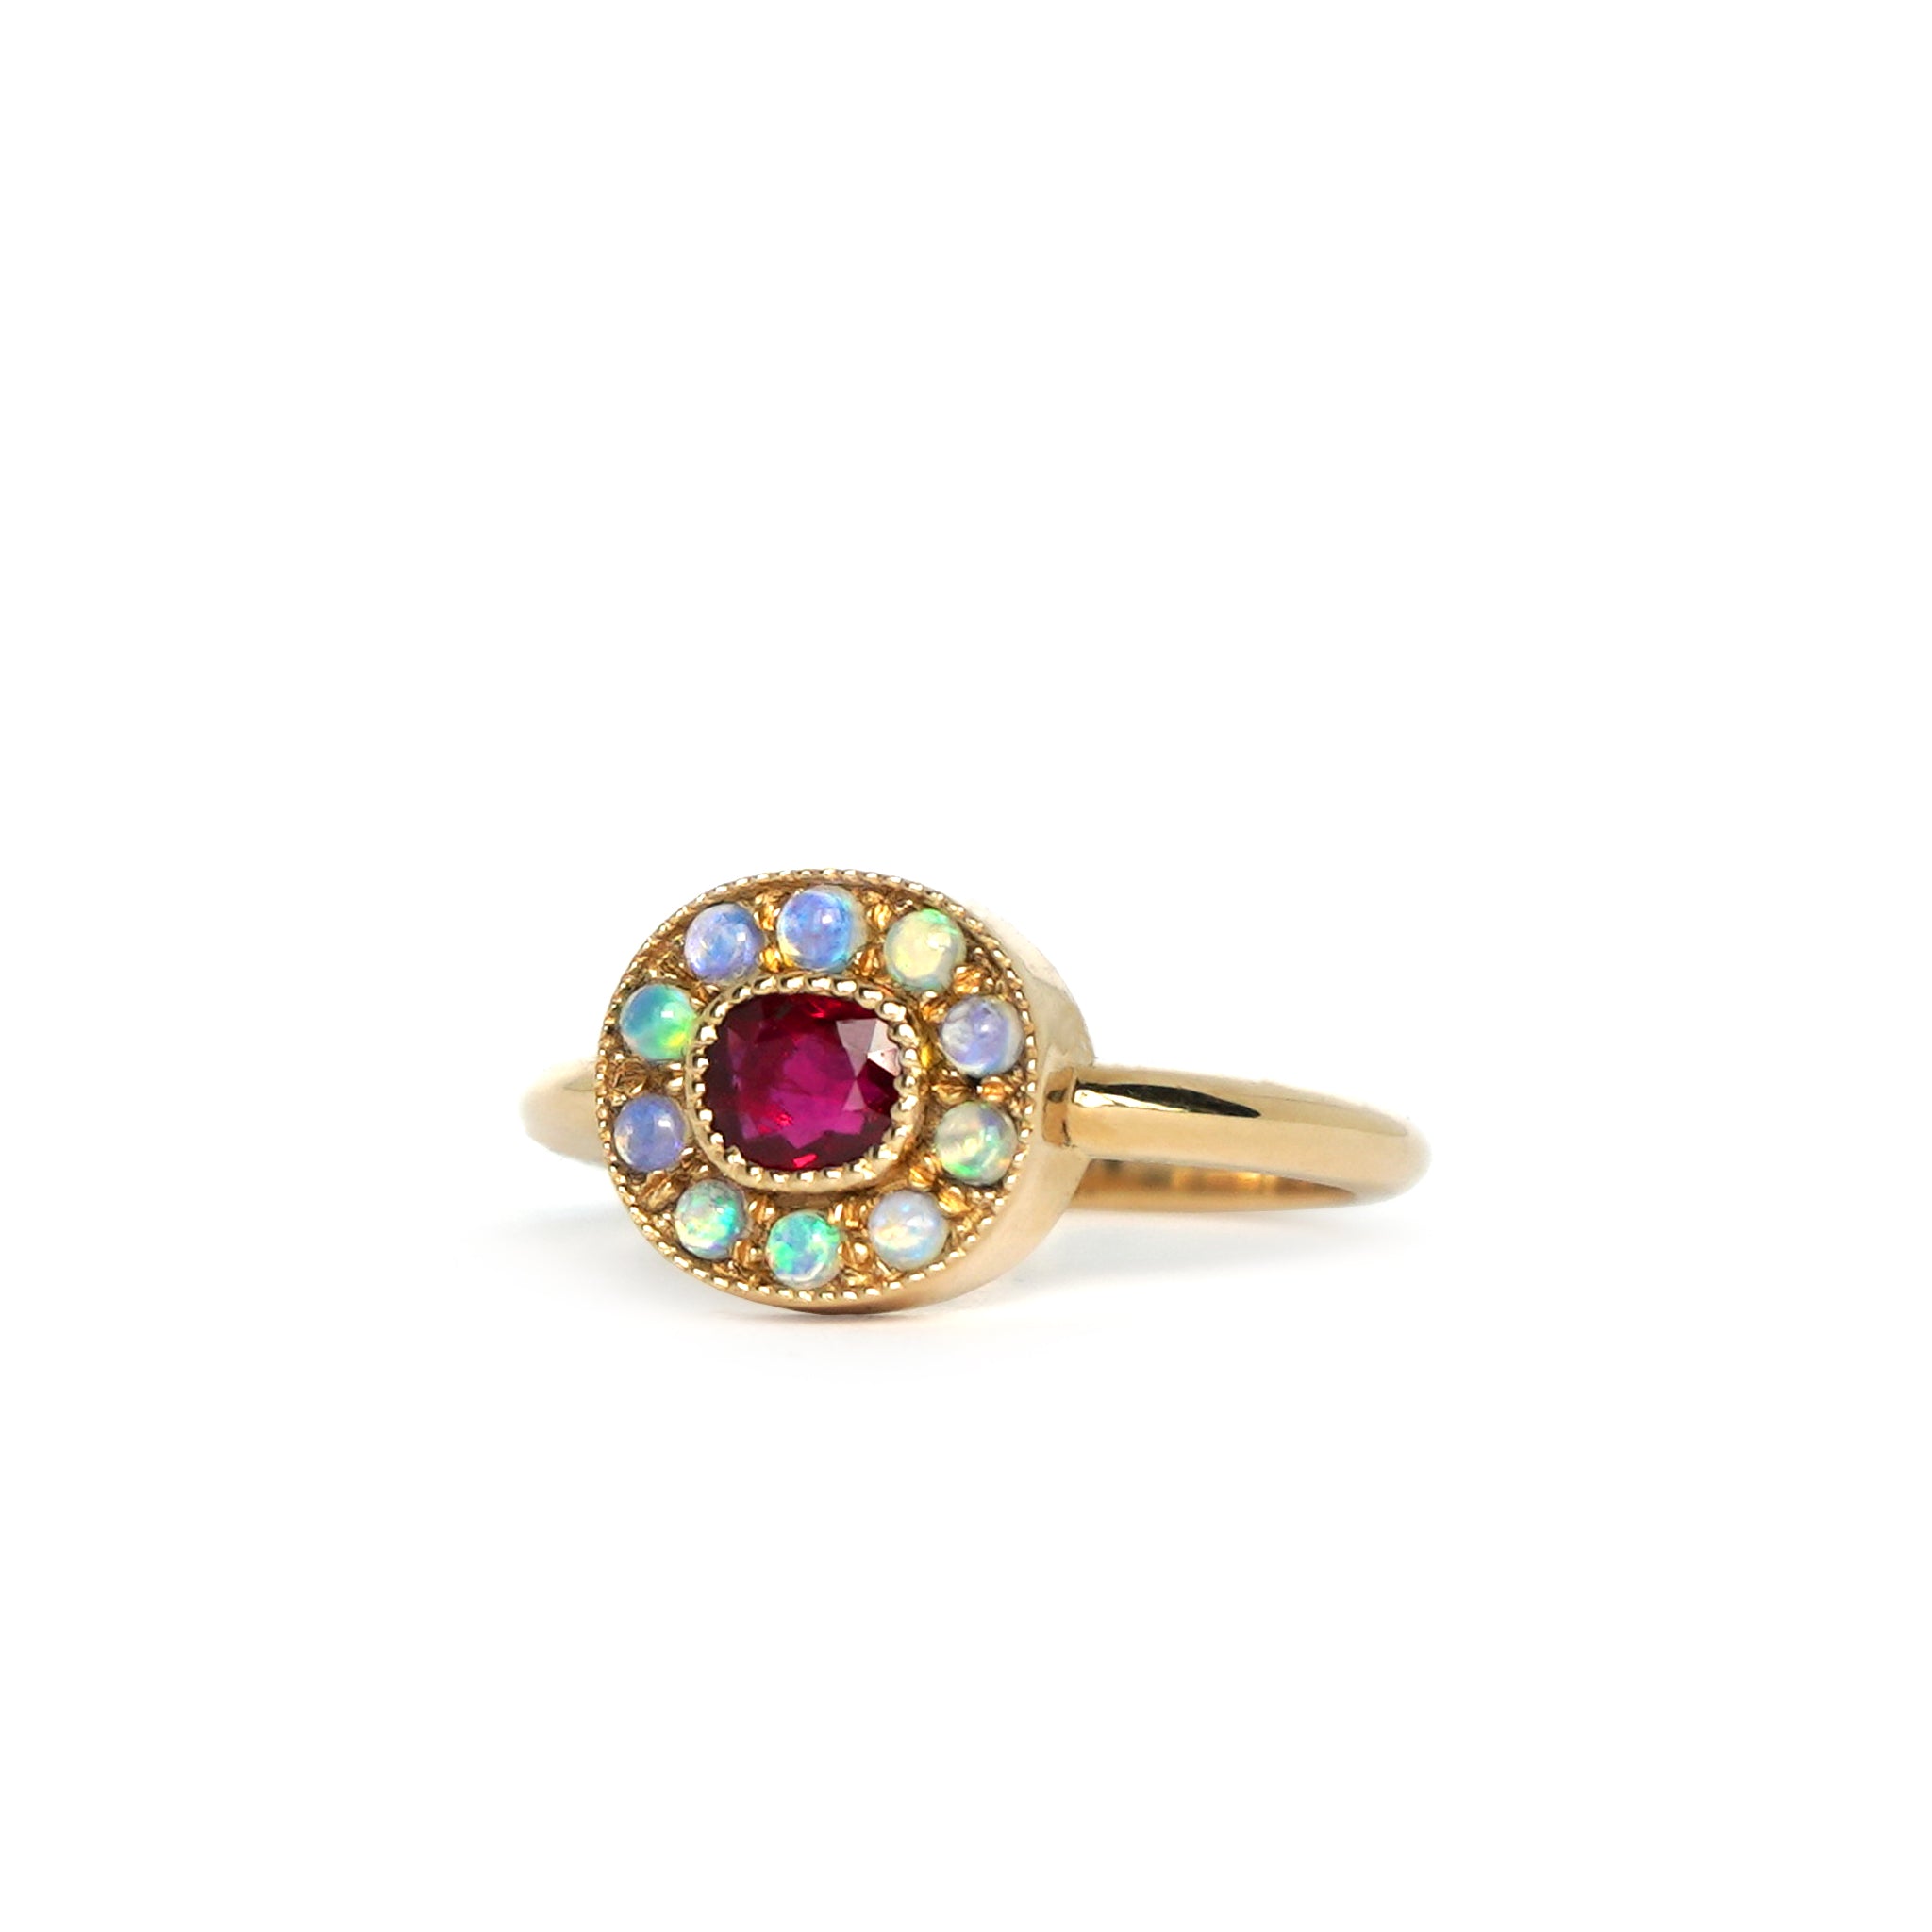 Close-up view of the one-of-a-kind Ruby halo ring with mini Australian opals, retro-antique inspired design by Lico Jewelry, set in solid 14k yellow gold, shown in ring size 8.